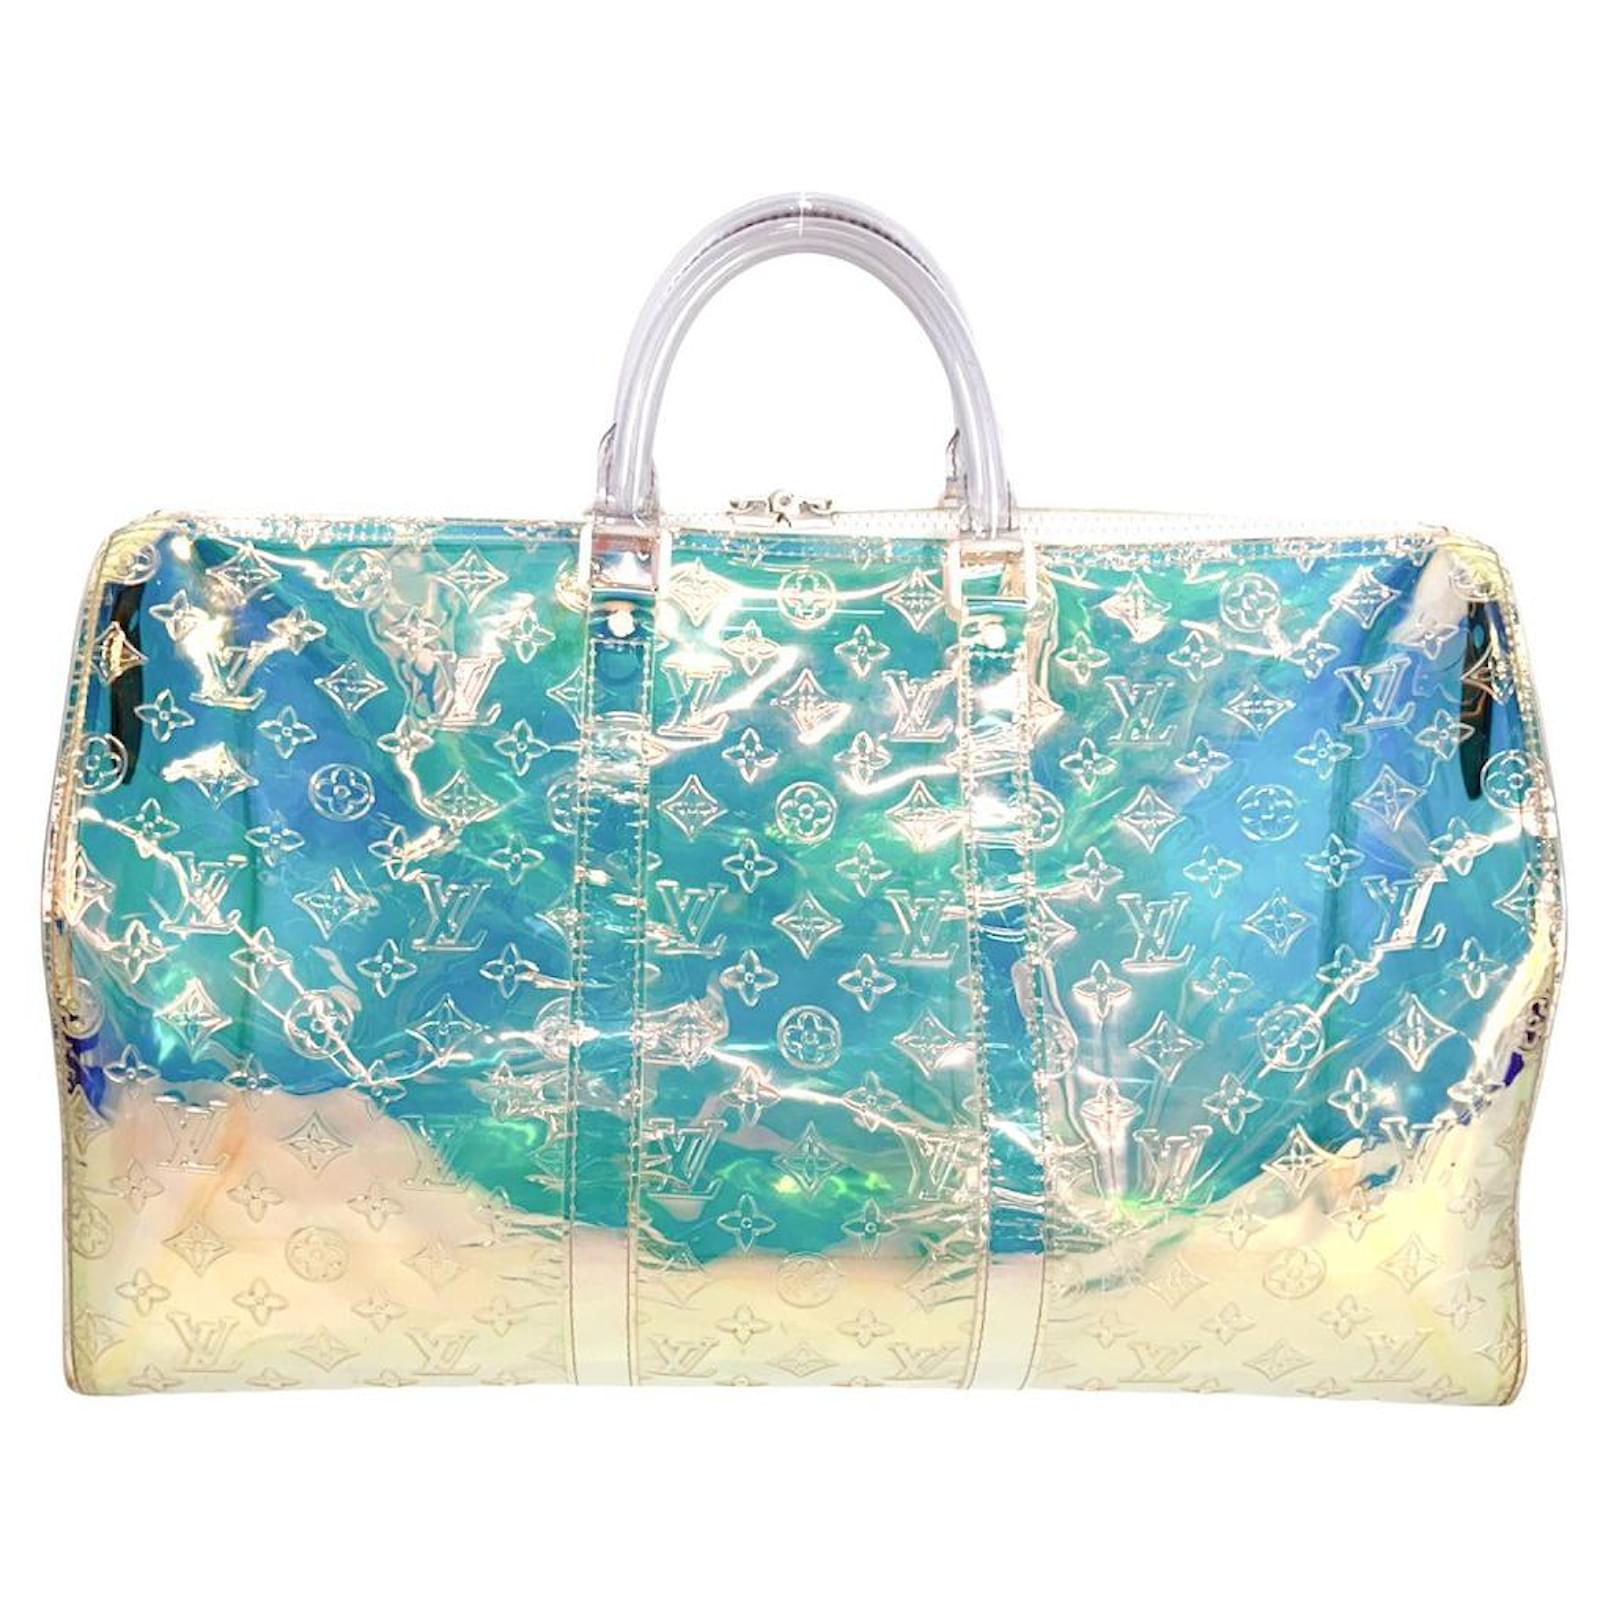 Bag - M40193 – Louis Vuitton Keepall Editions Limitées travel bag in blue  and white monogram canvas - Vuitton - Color - Hand - Monogram - Louis -  Louis Vuitton Stephen Sprouse Leopard Speedy - Multi - Claudia